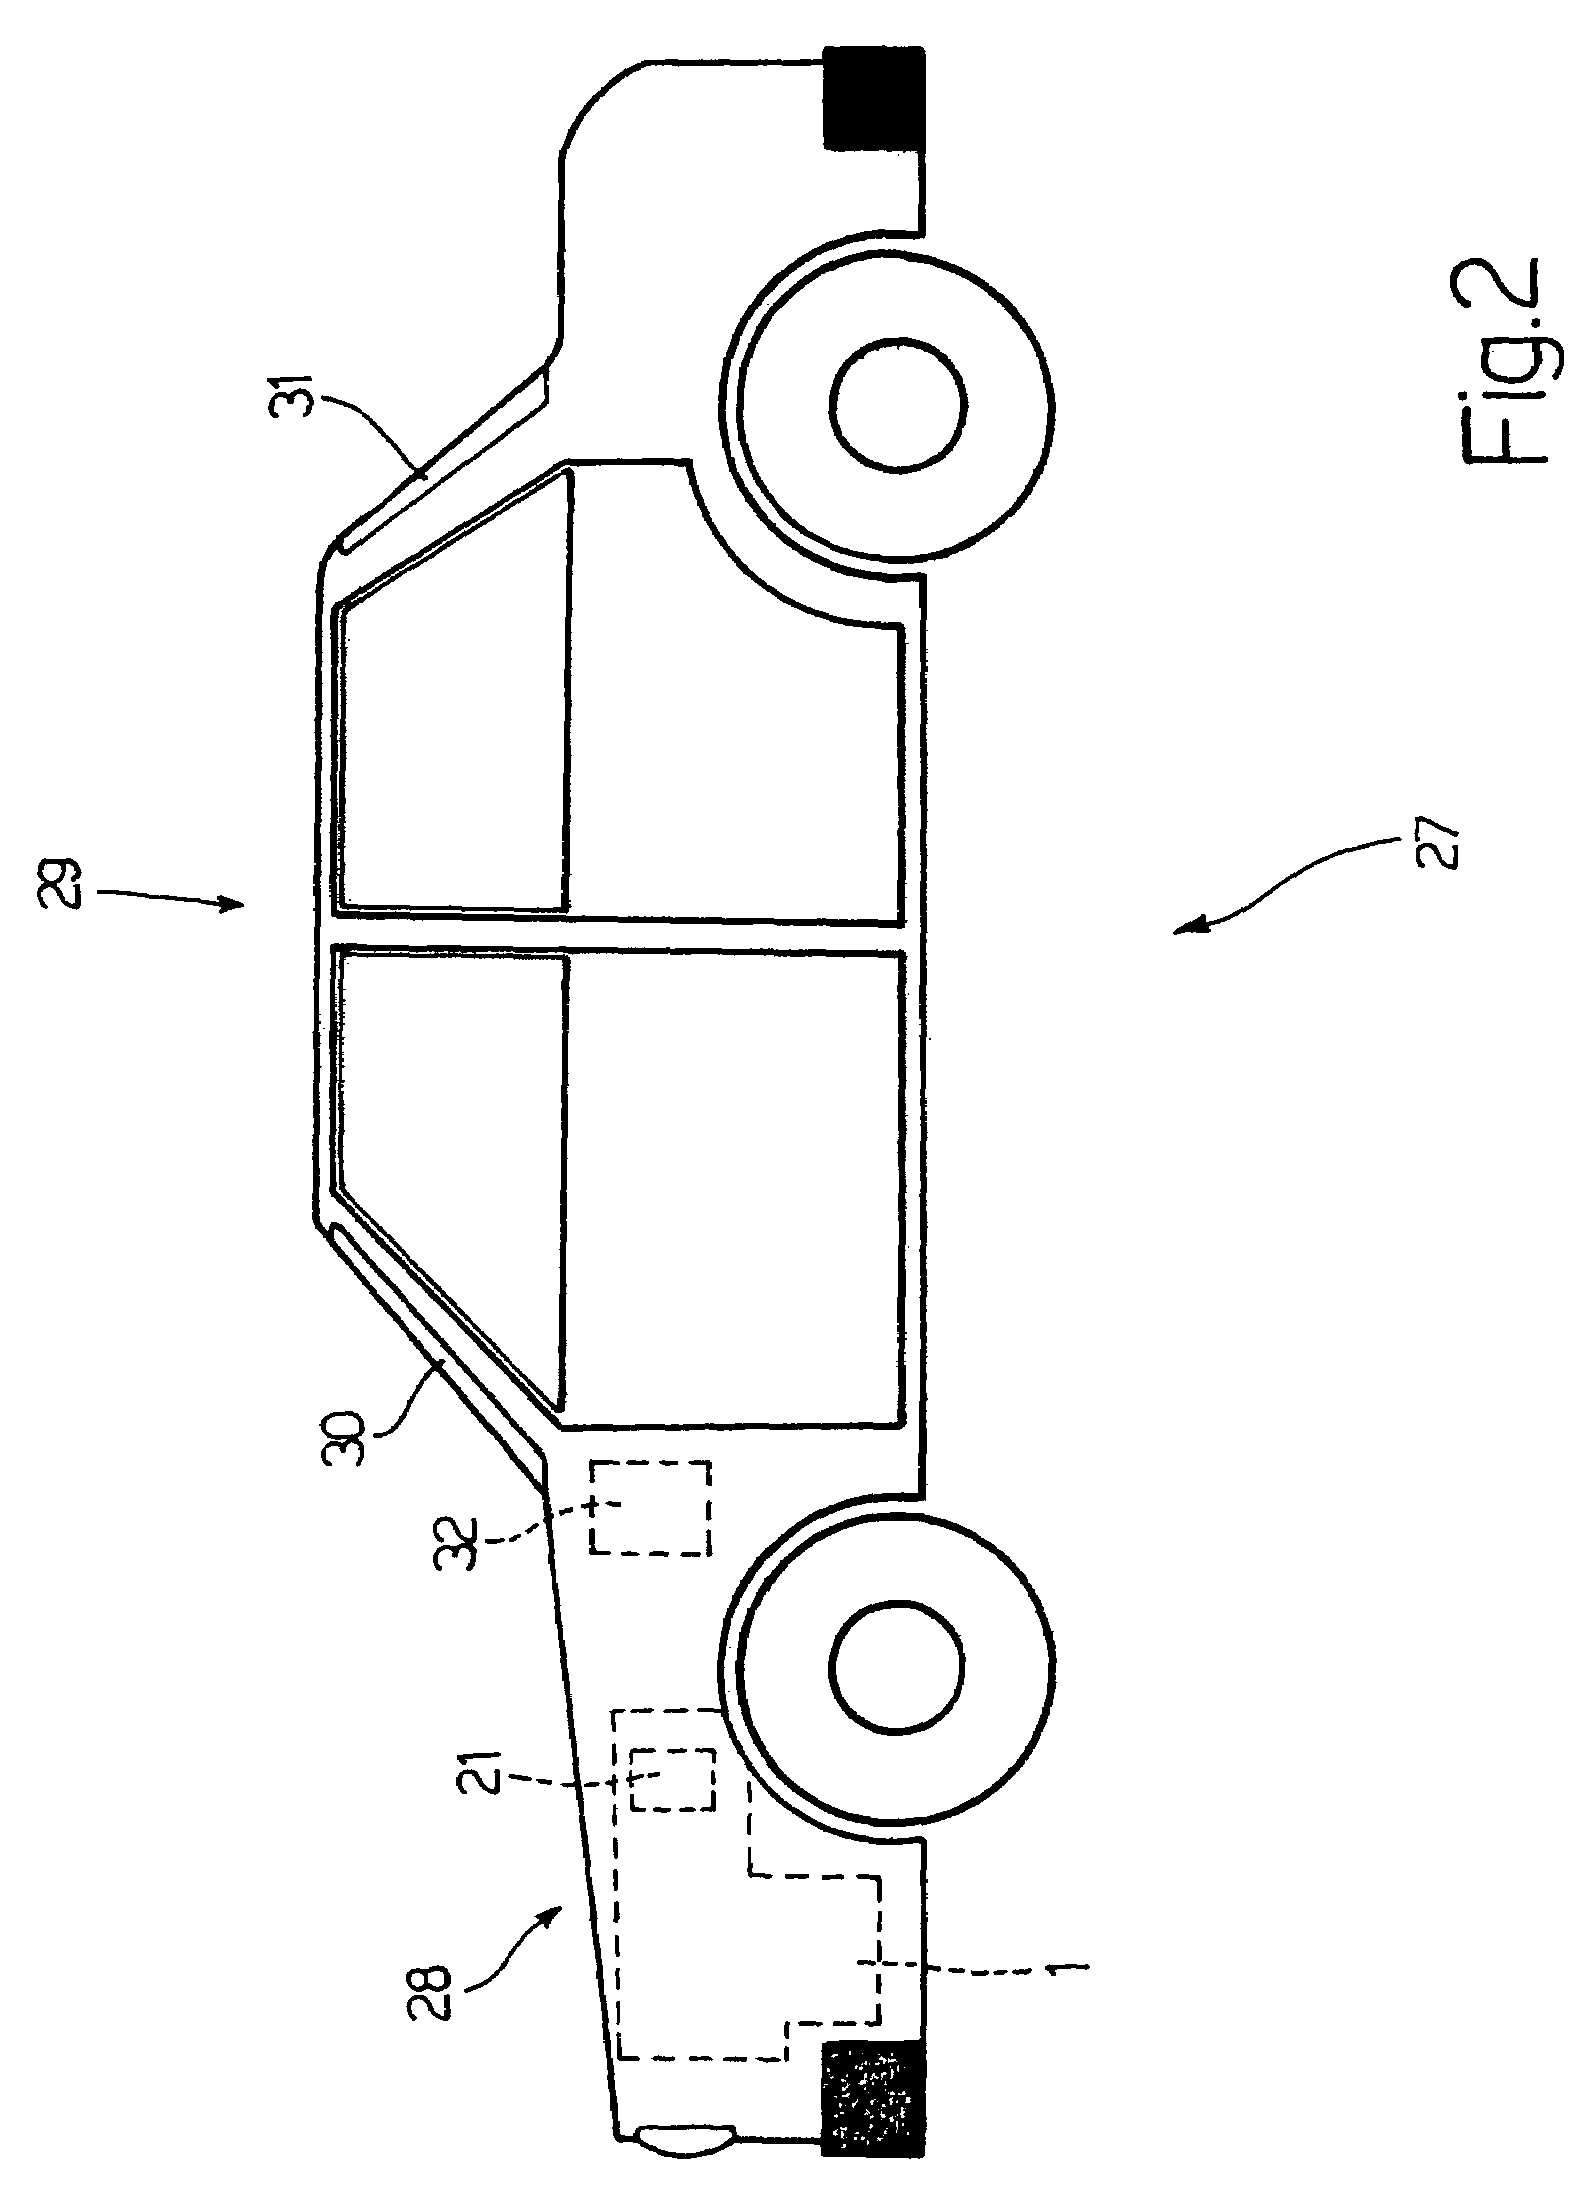 Method for managing the "stop-and-start" mode in a motor vehicle equipped with an internal combustion engine